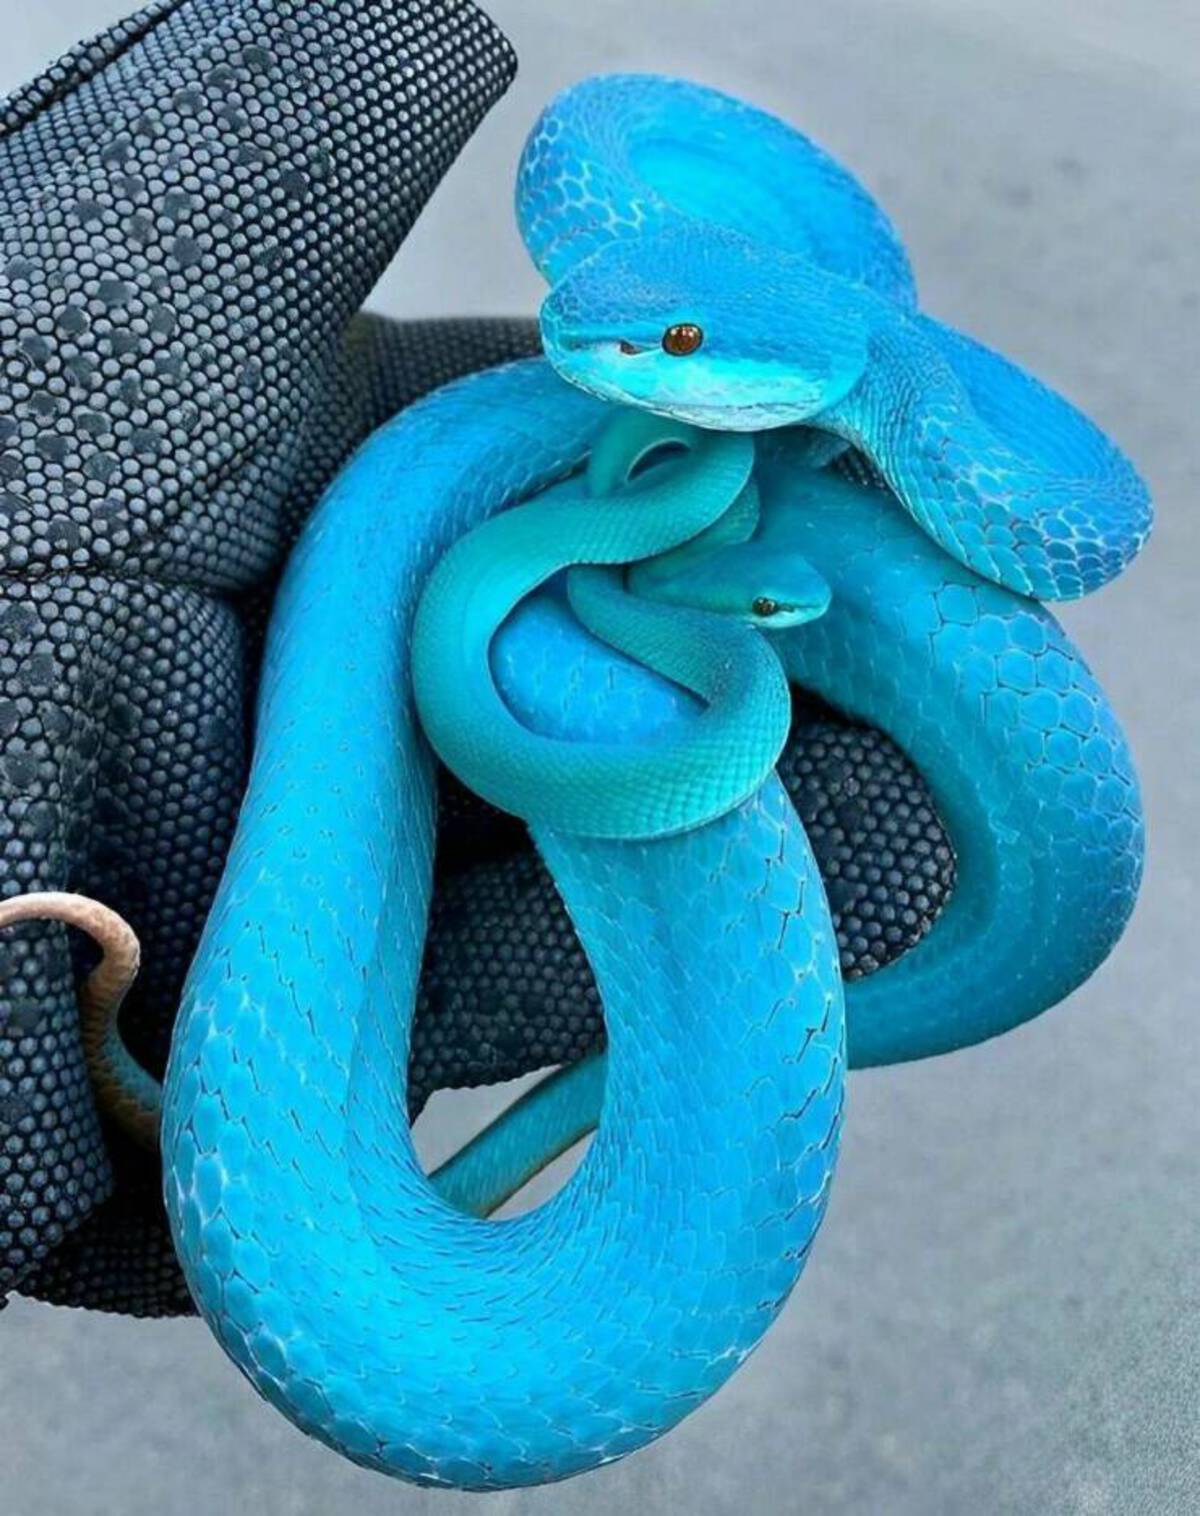 most beautiful snake in the world